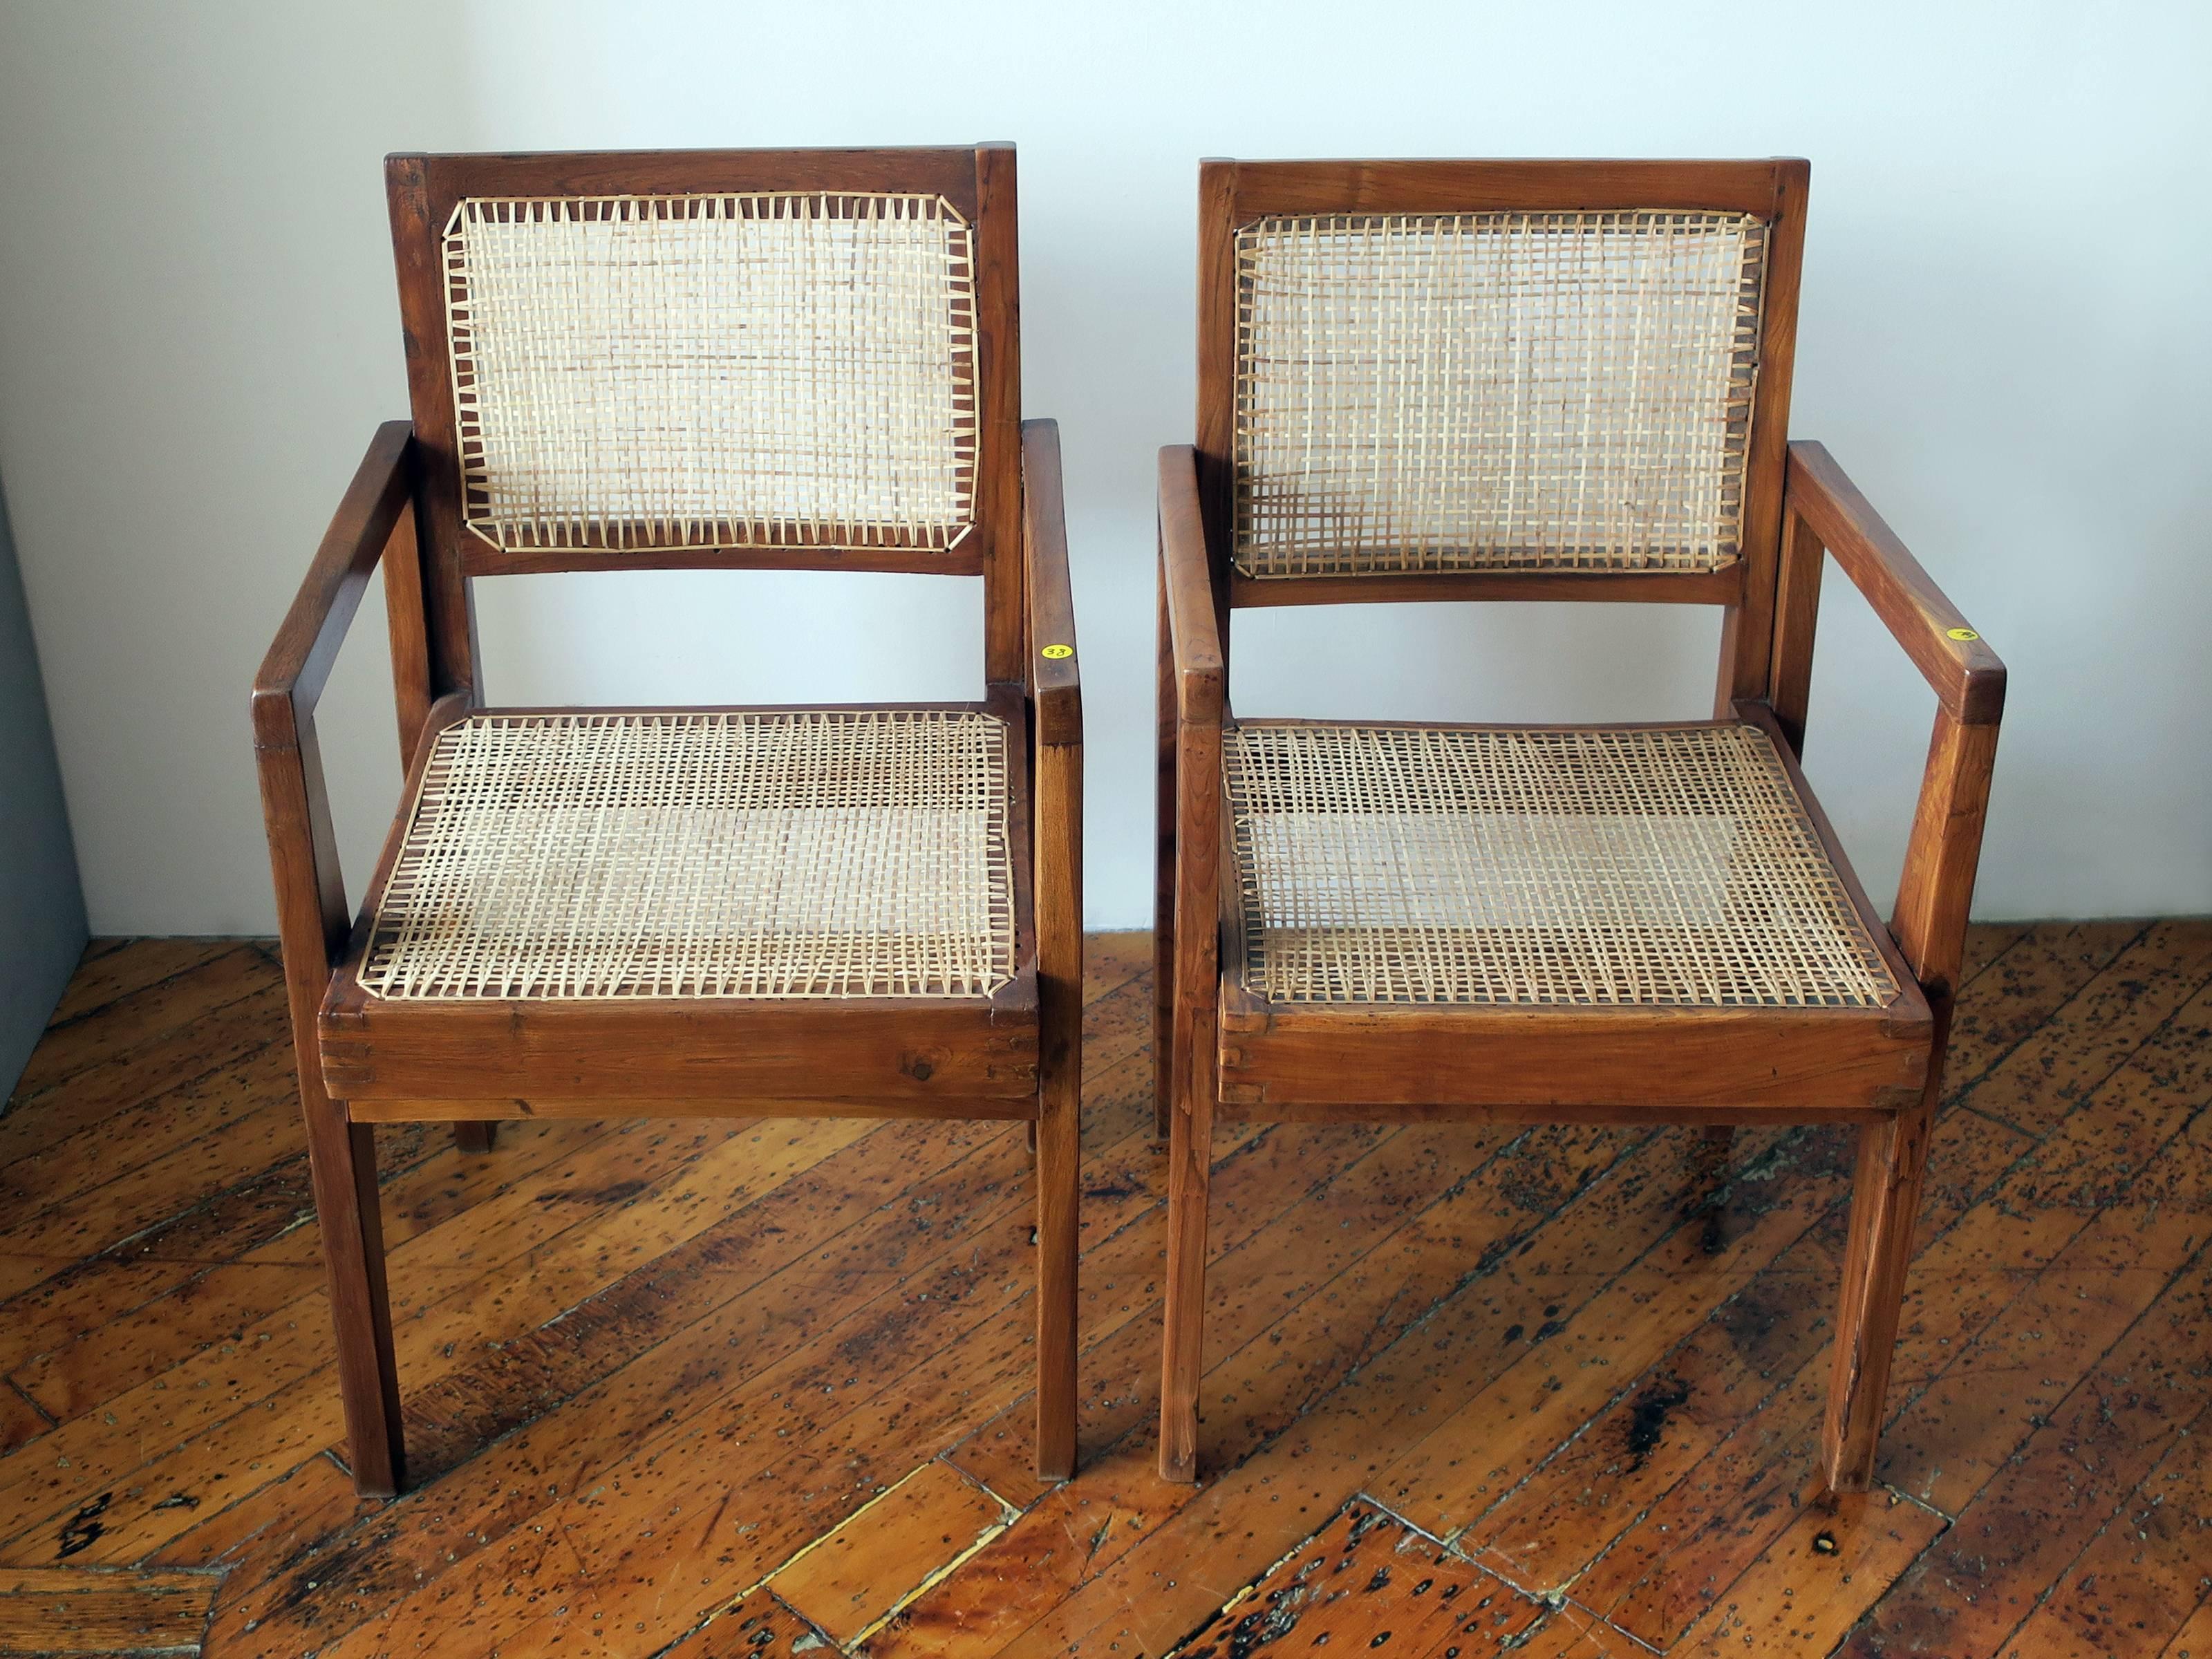 Indian Pierre Jeanneret Pair of Take Down Armchairs, circa 1955-60